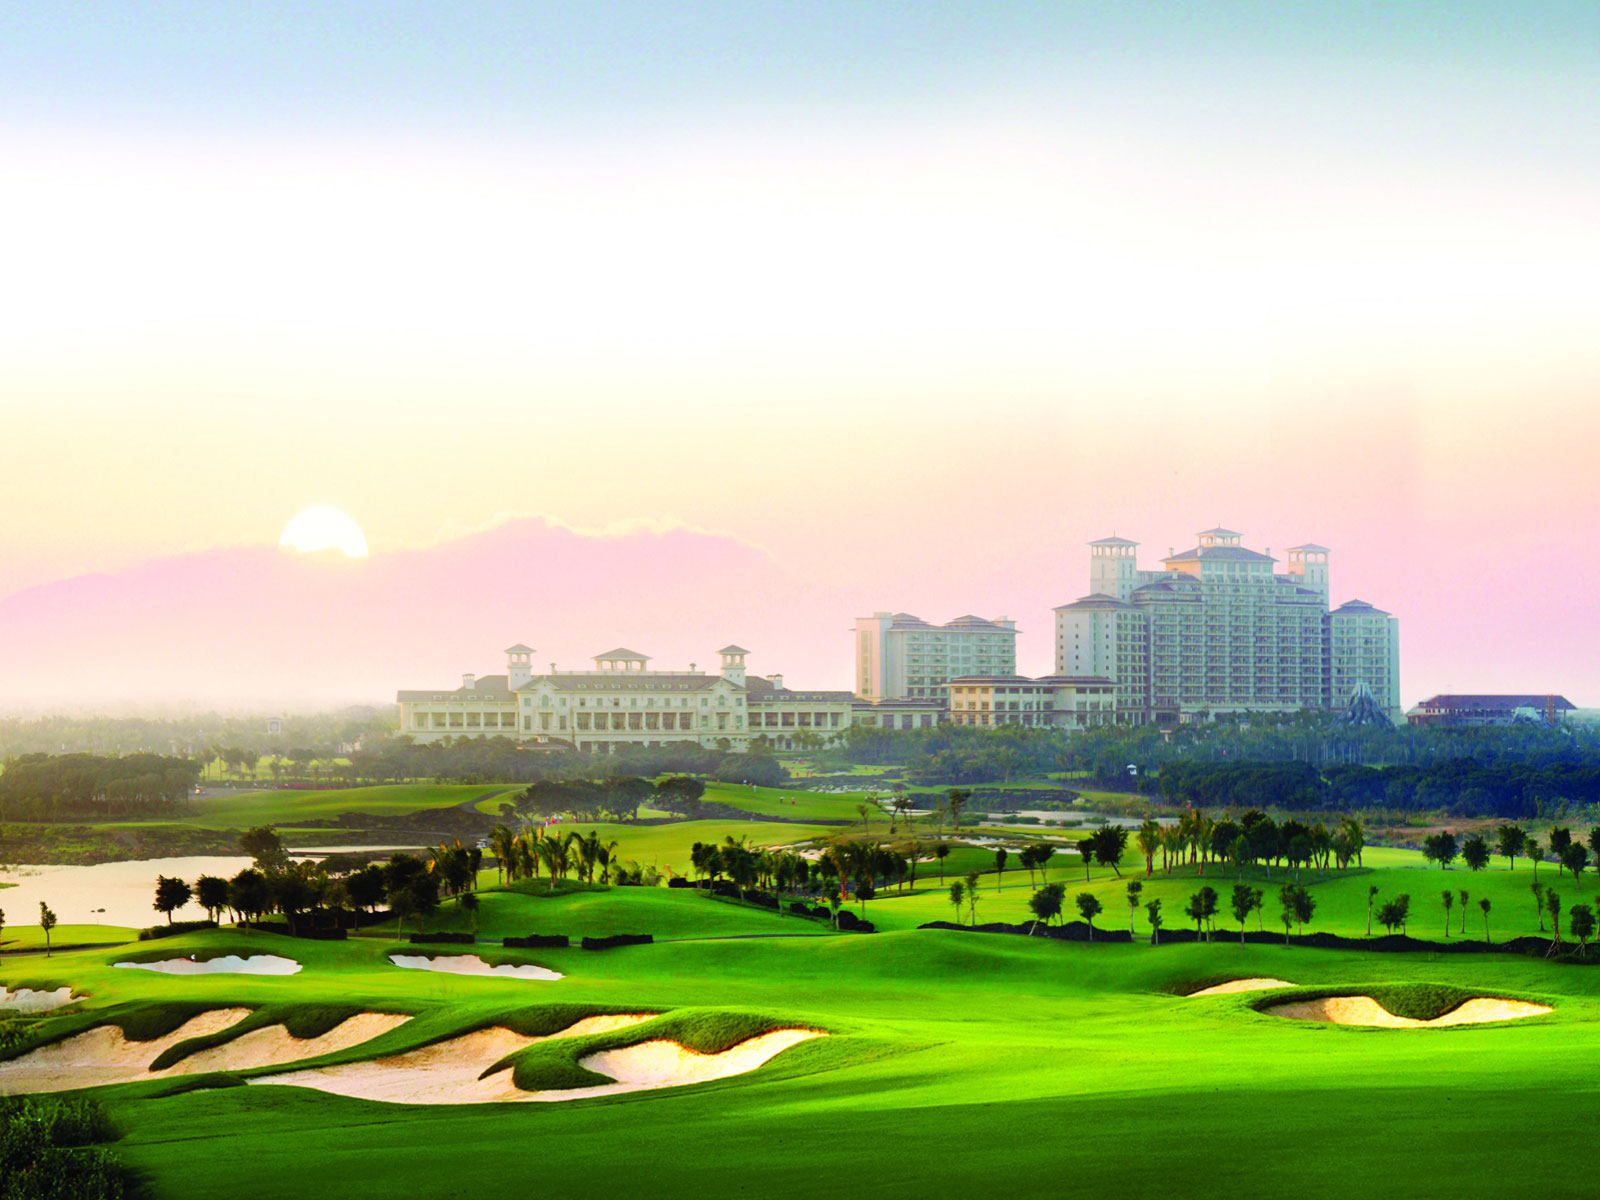 Mission Hills Golf in China